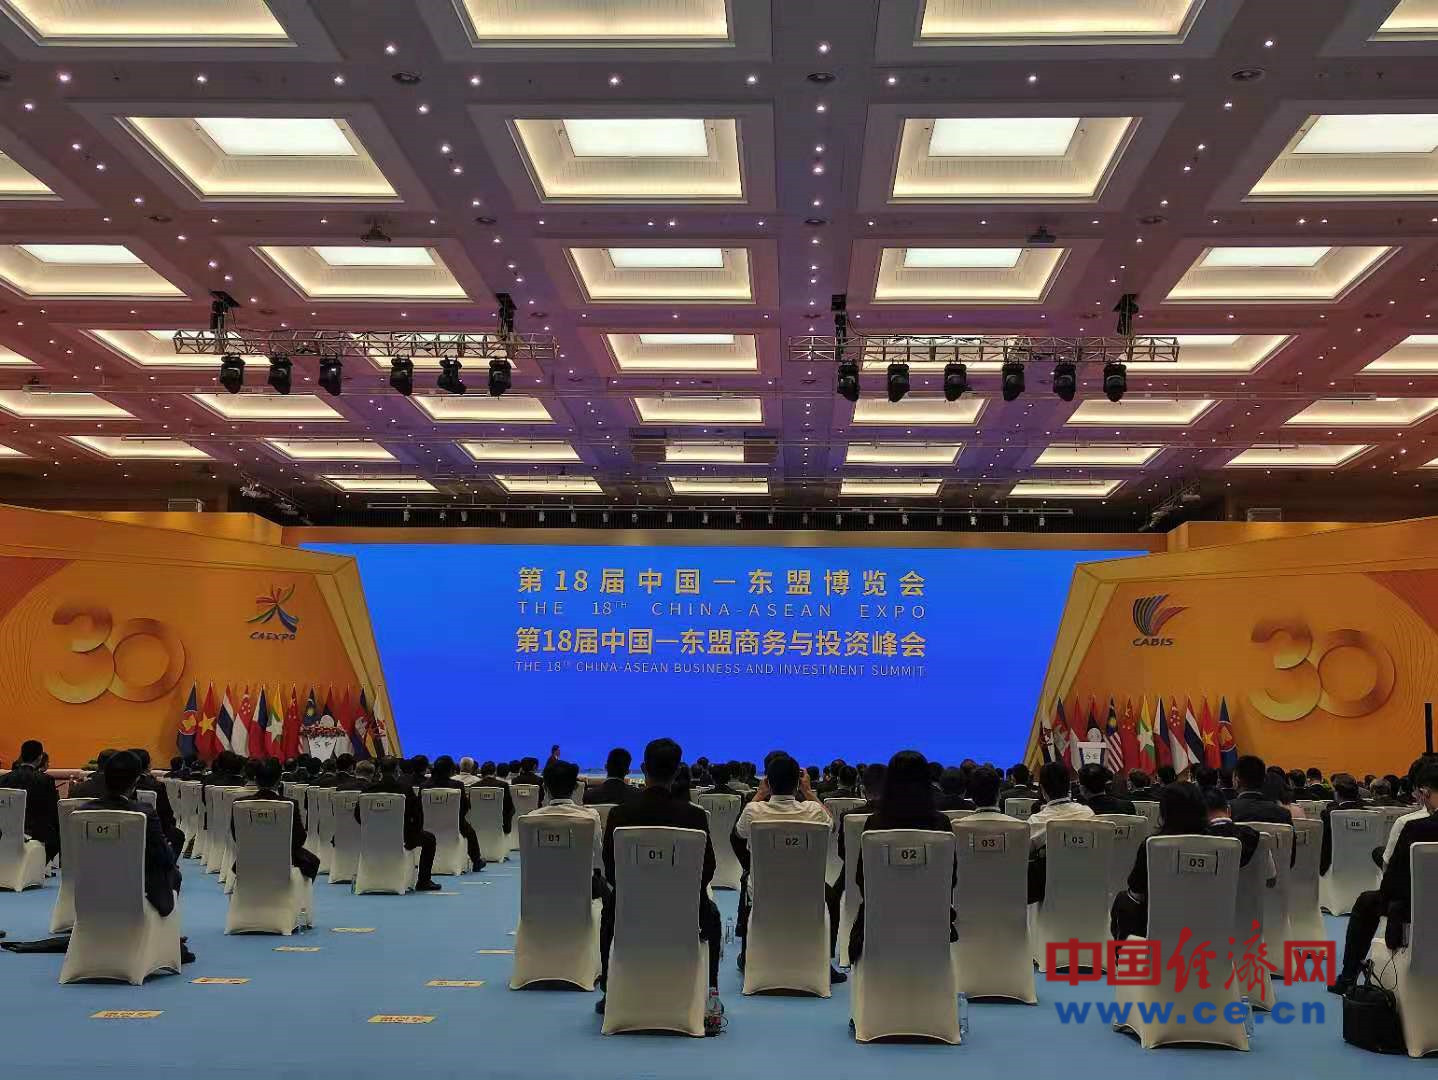 China-ASEAN Expo formally kicks off in Nanning – Pakistan participates as special partner country